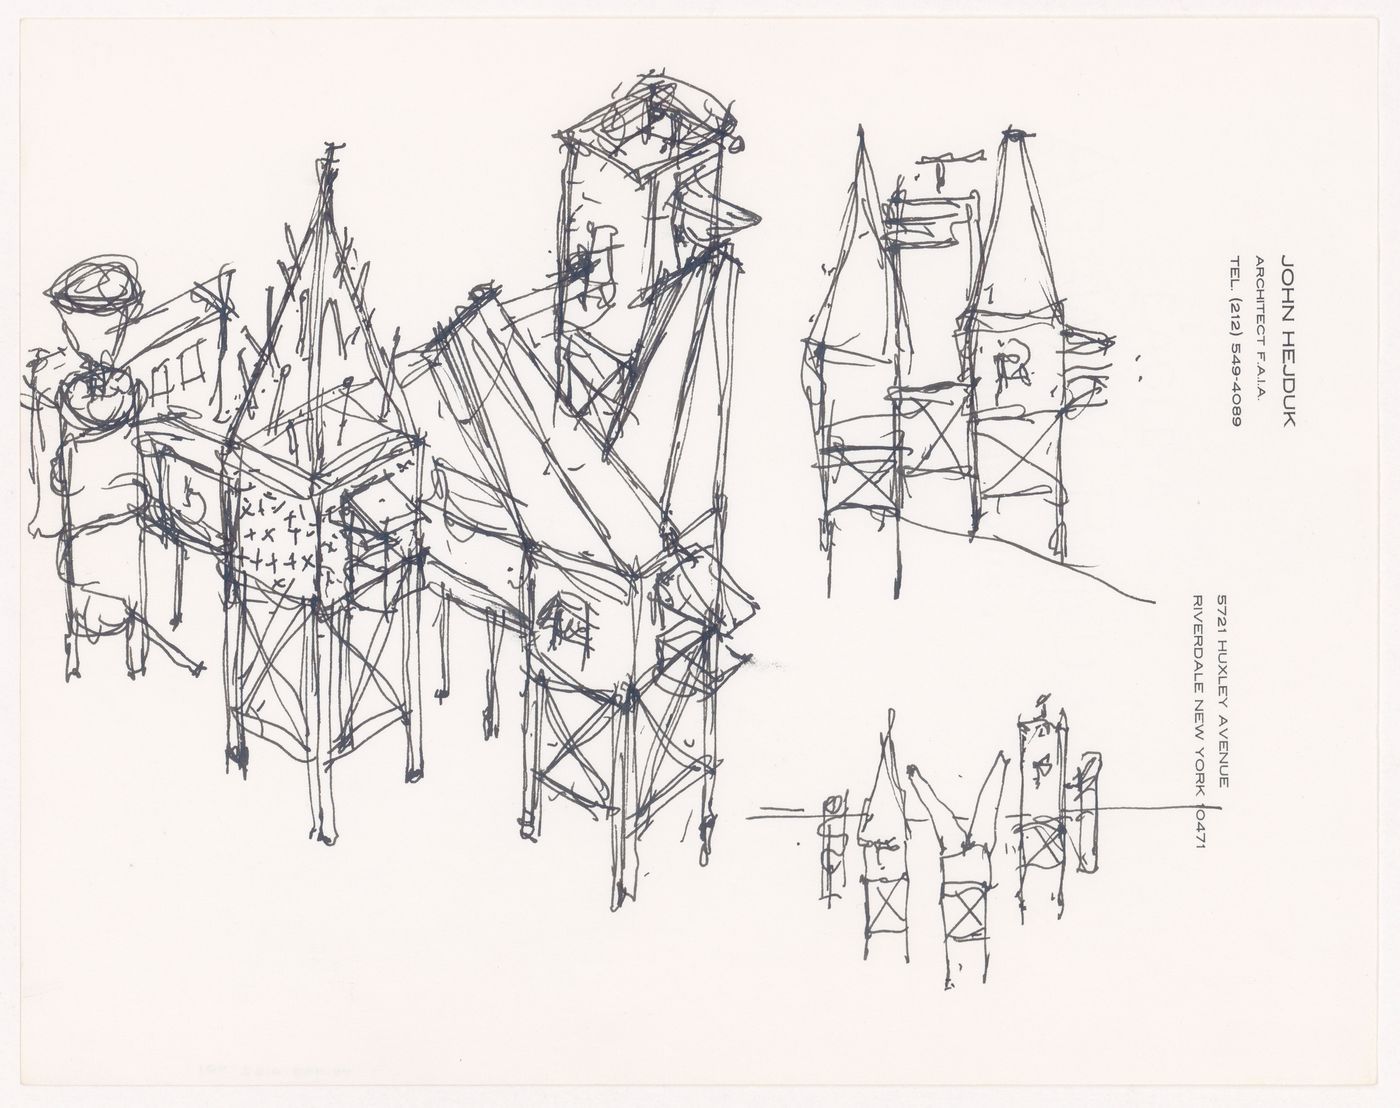 Sketch axonometric and elevations for House for a Poet